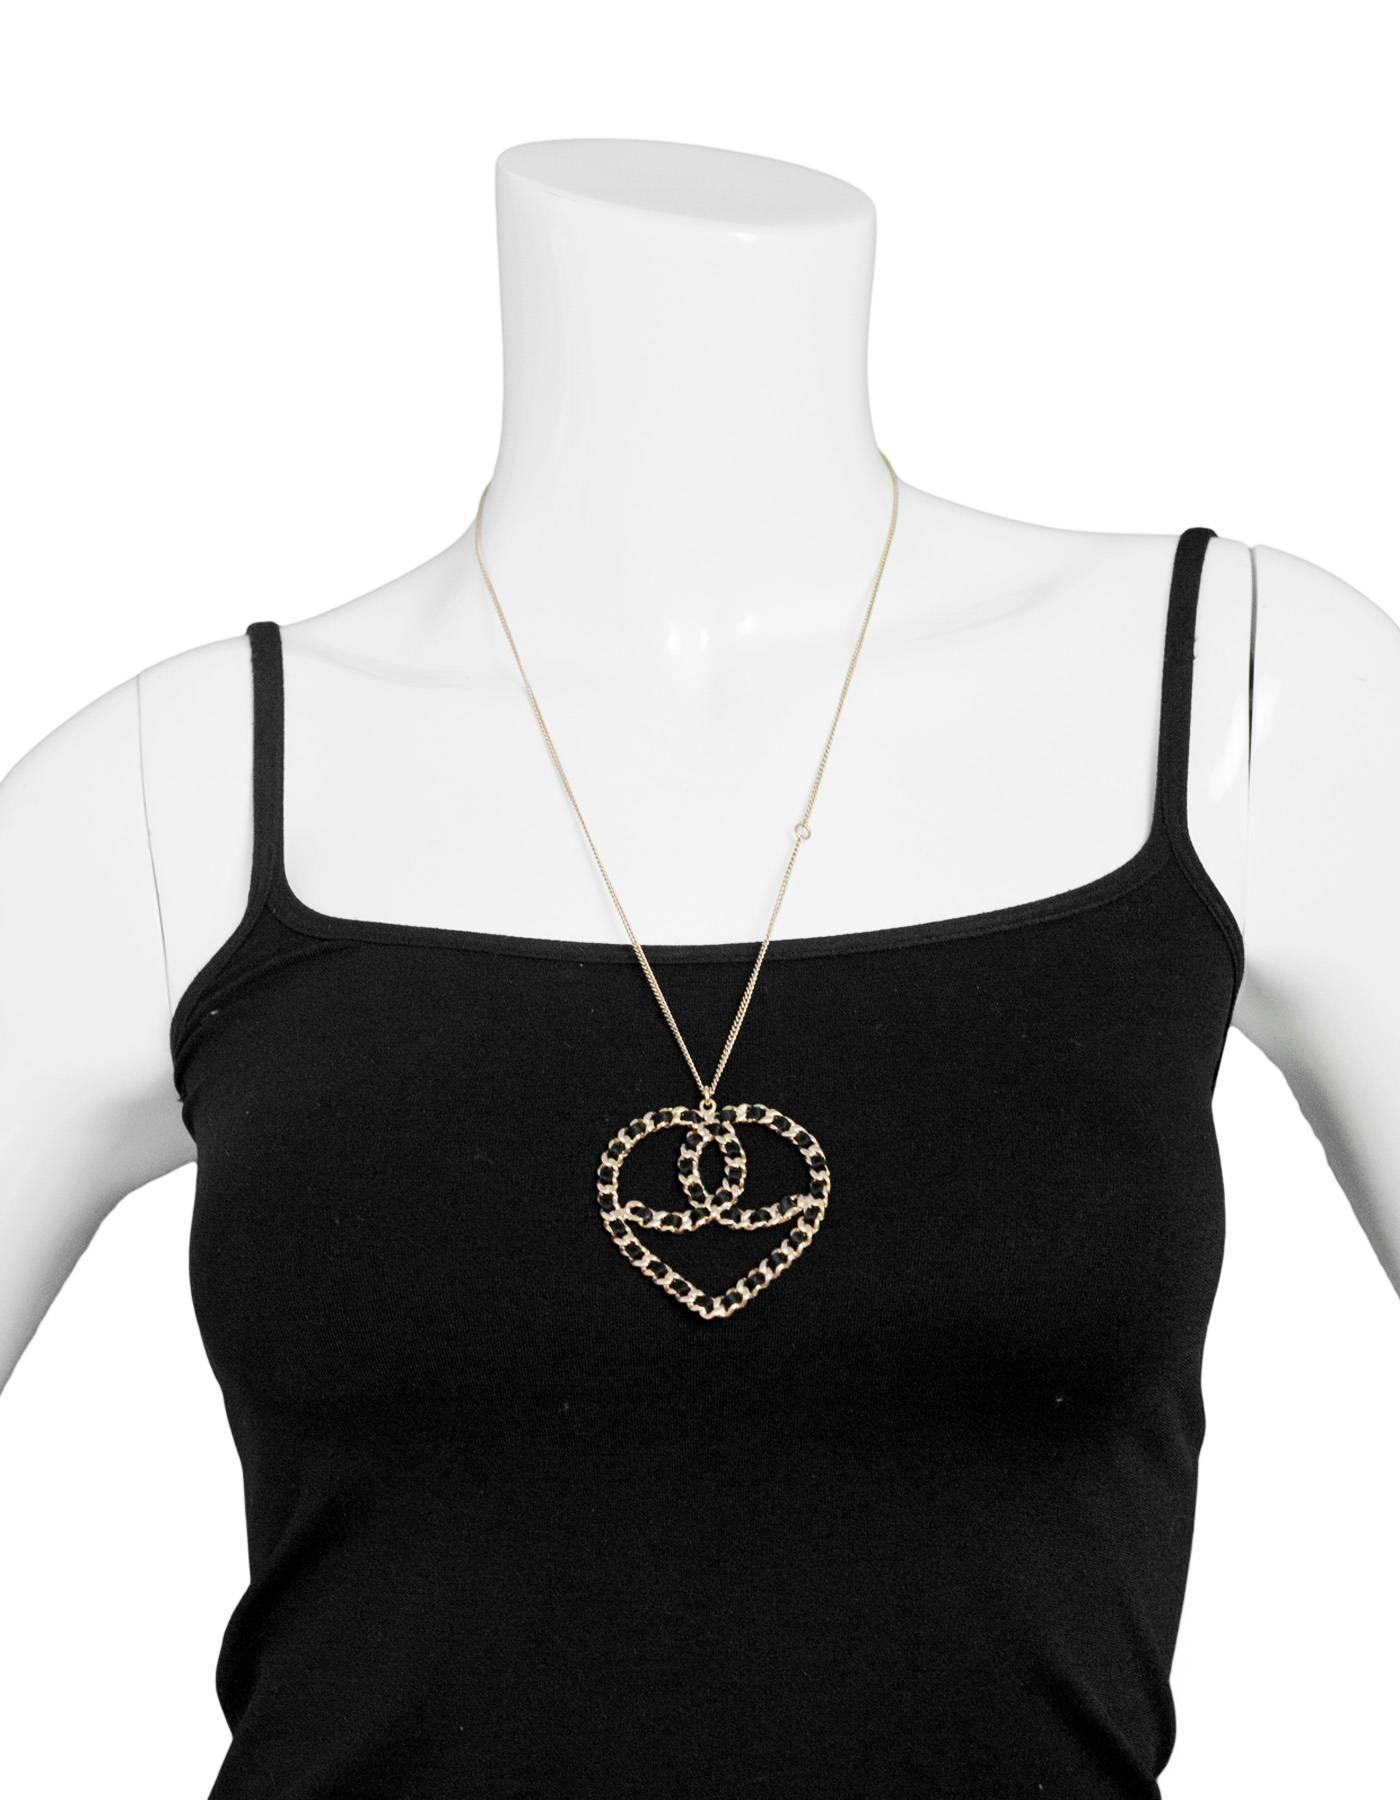 Chanel Black & Goldtone CC Heart Necklace
Features satin chain-link heart and adjustable length

Made In: Italy
Year of Production: 2009
Color: Light goldtone
Materials: Metal, satin
Closure: Lobster clasp
Stamp: Chanel 09 CC c Made In